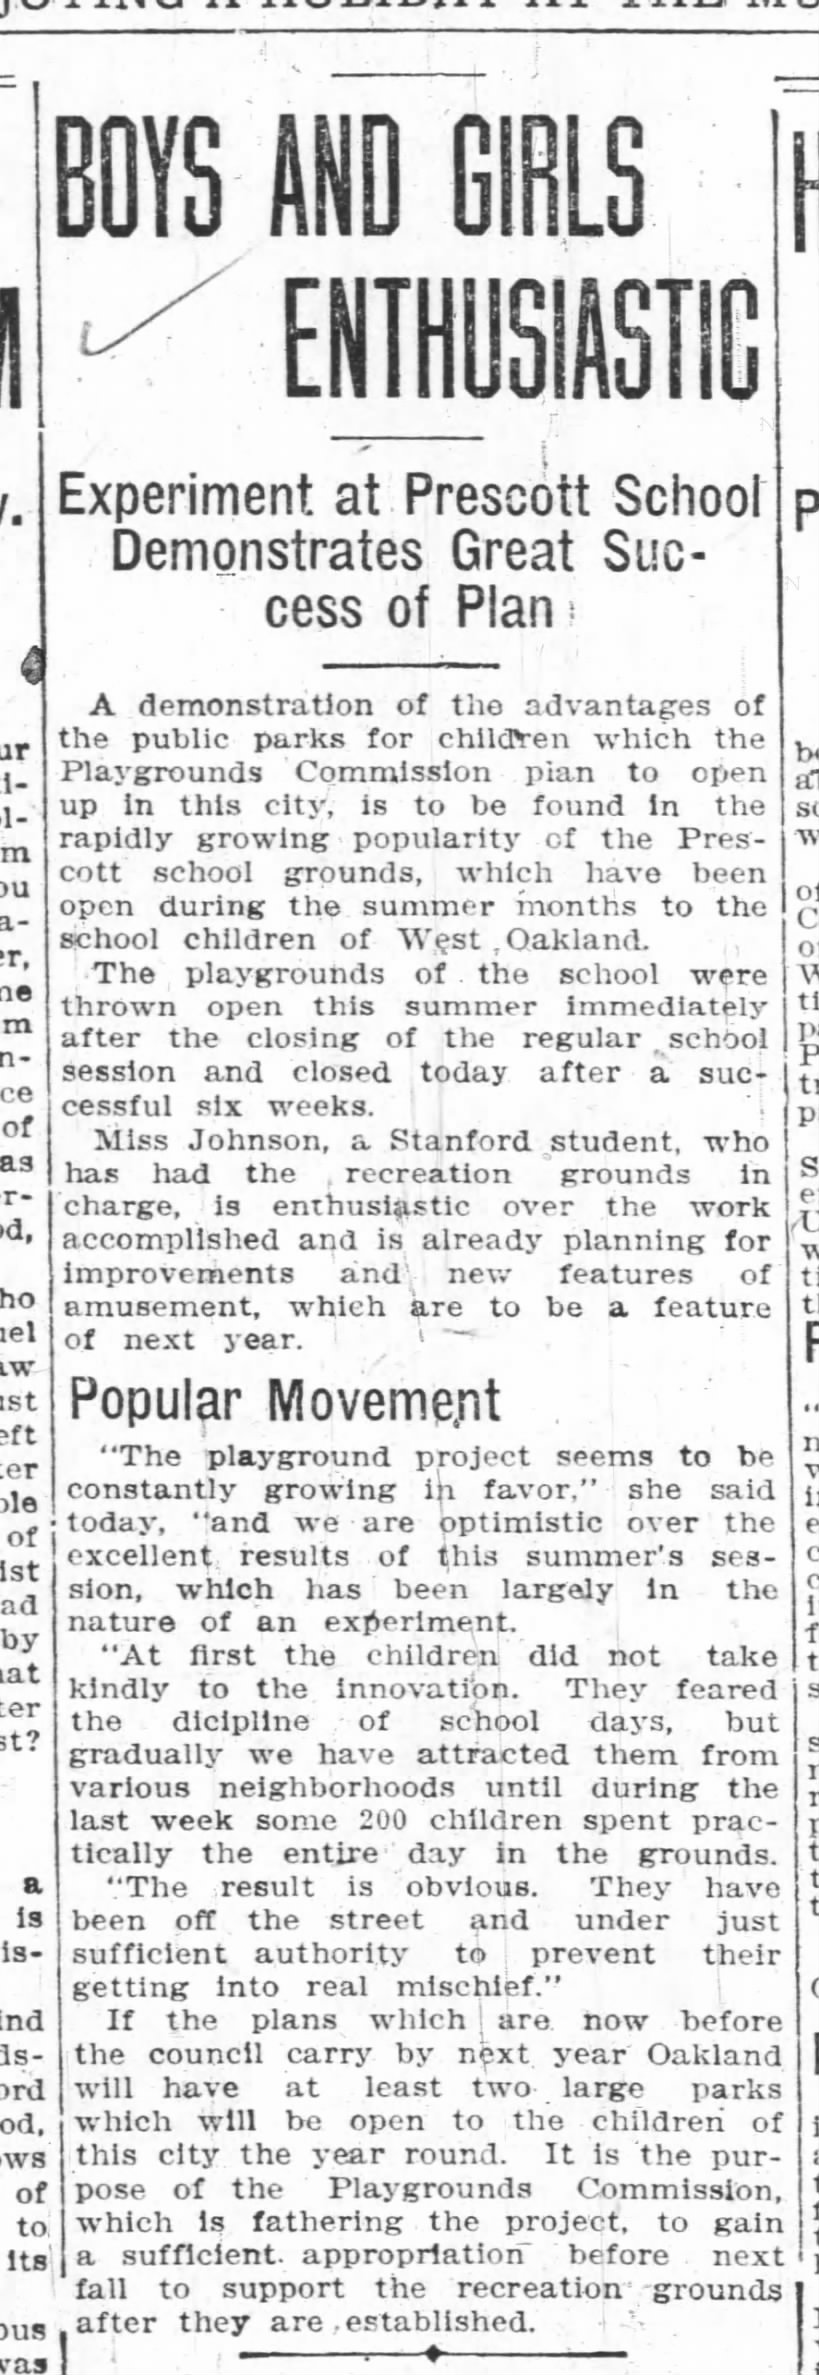 Boys and Girls Enthusiastic - Playgrounds July 19,1909